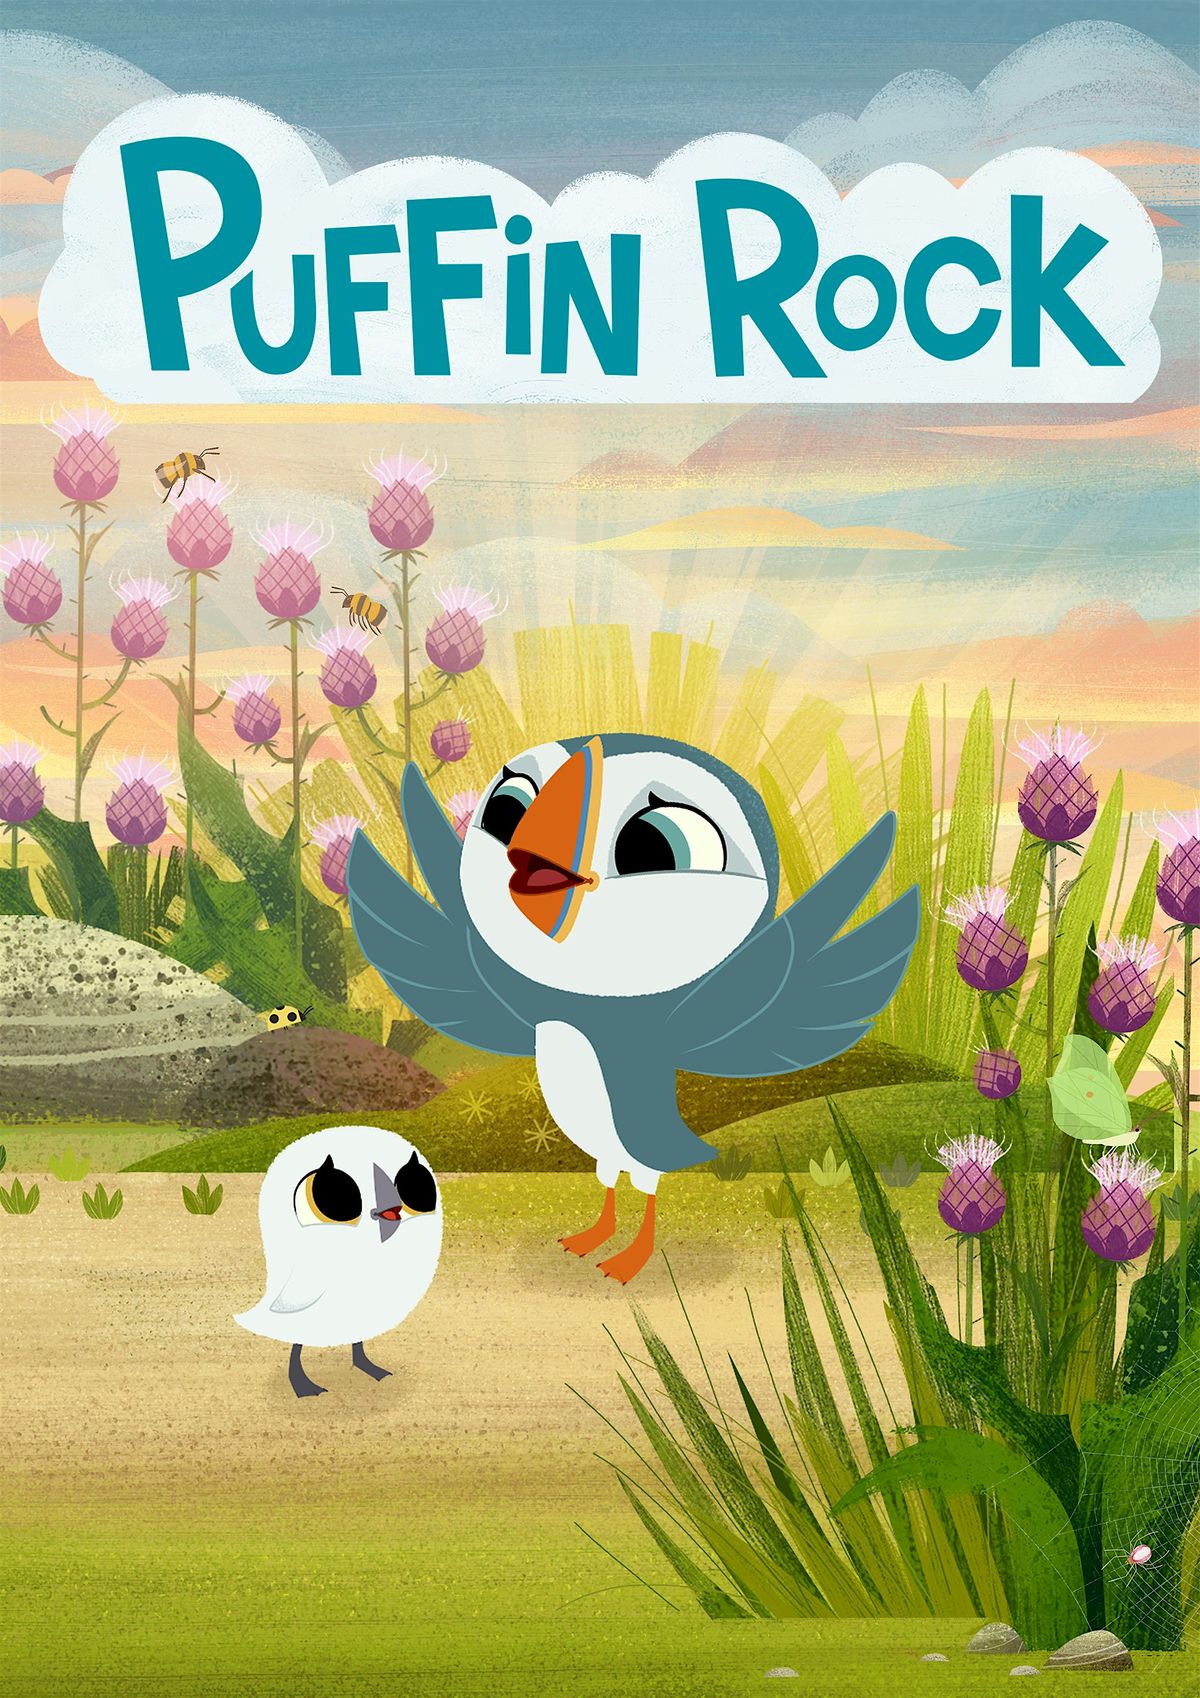 Cartoon Saloon with Puffin Rock